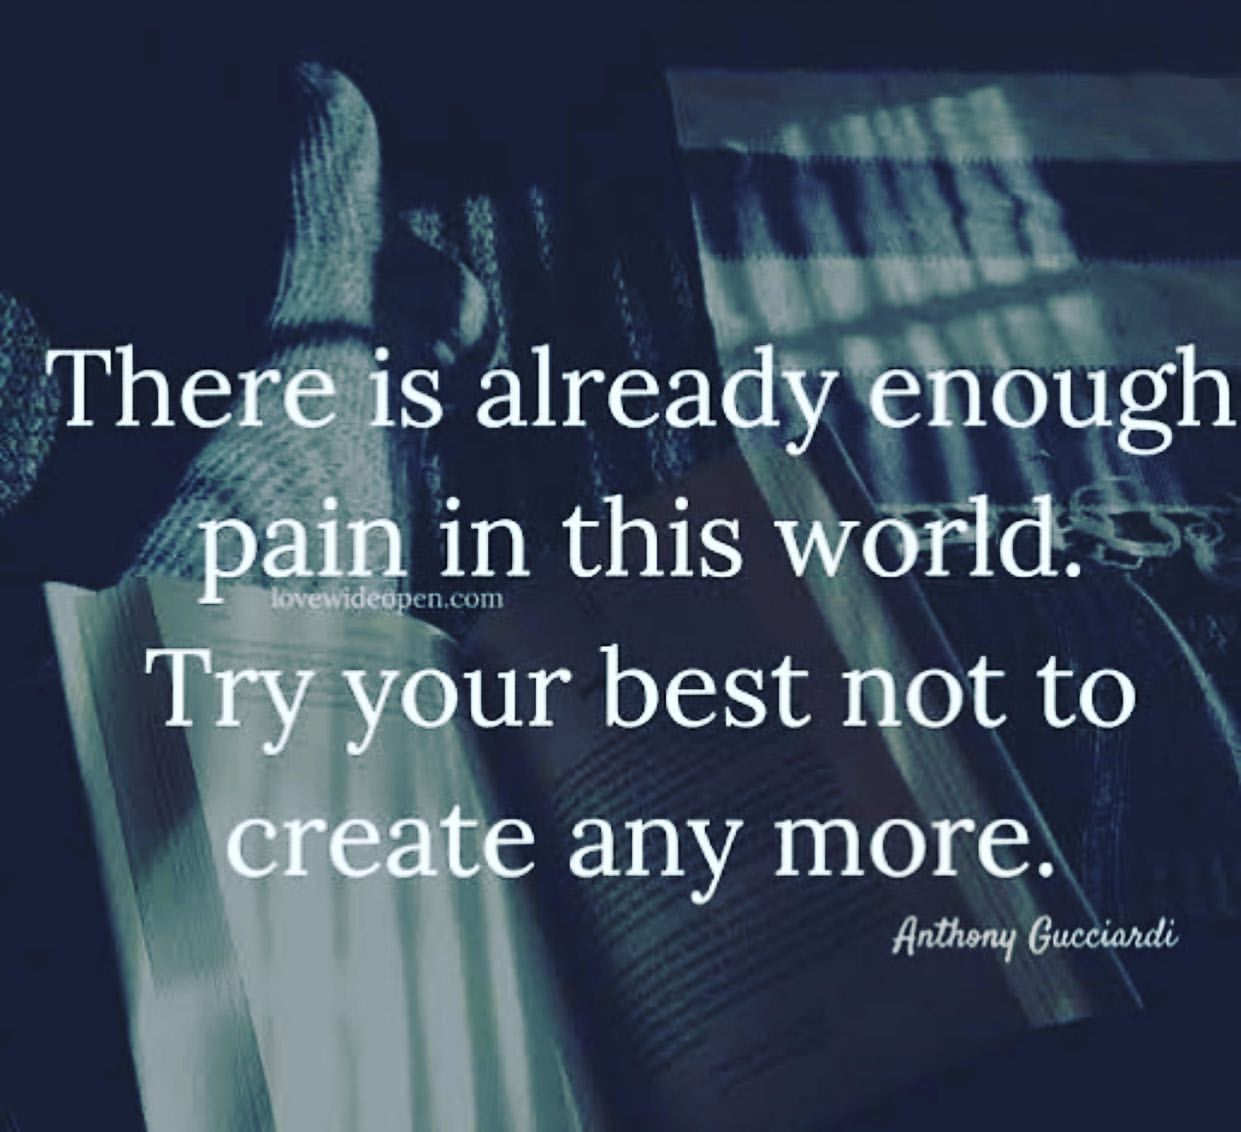 There is already enough pain in this world. Try your best not to create any more.